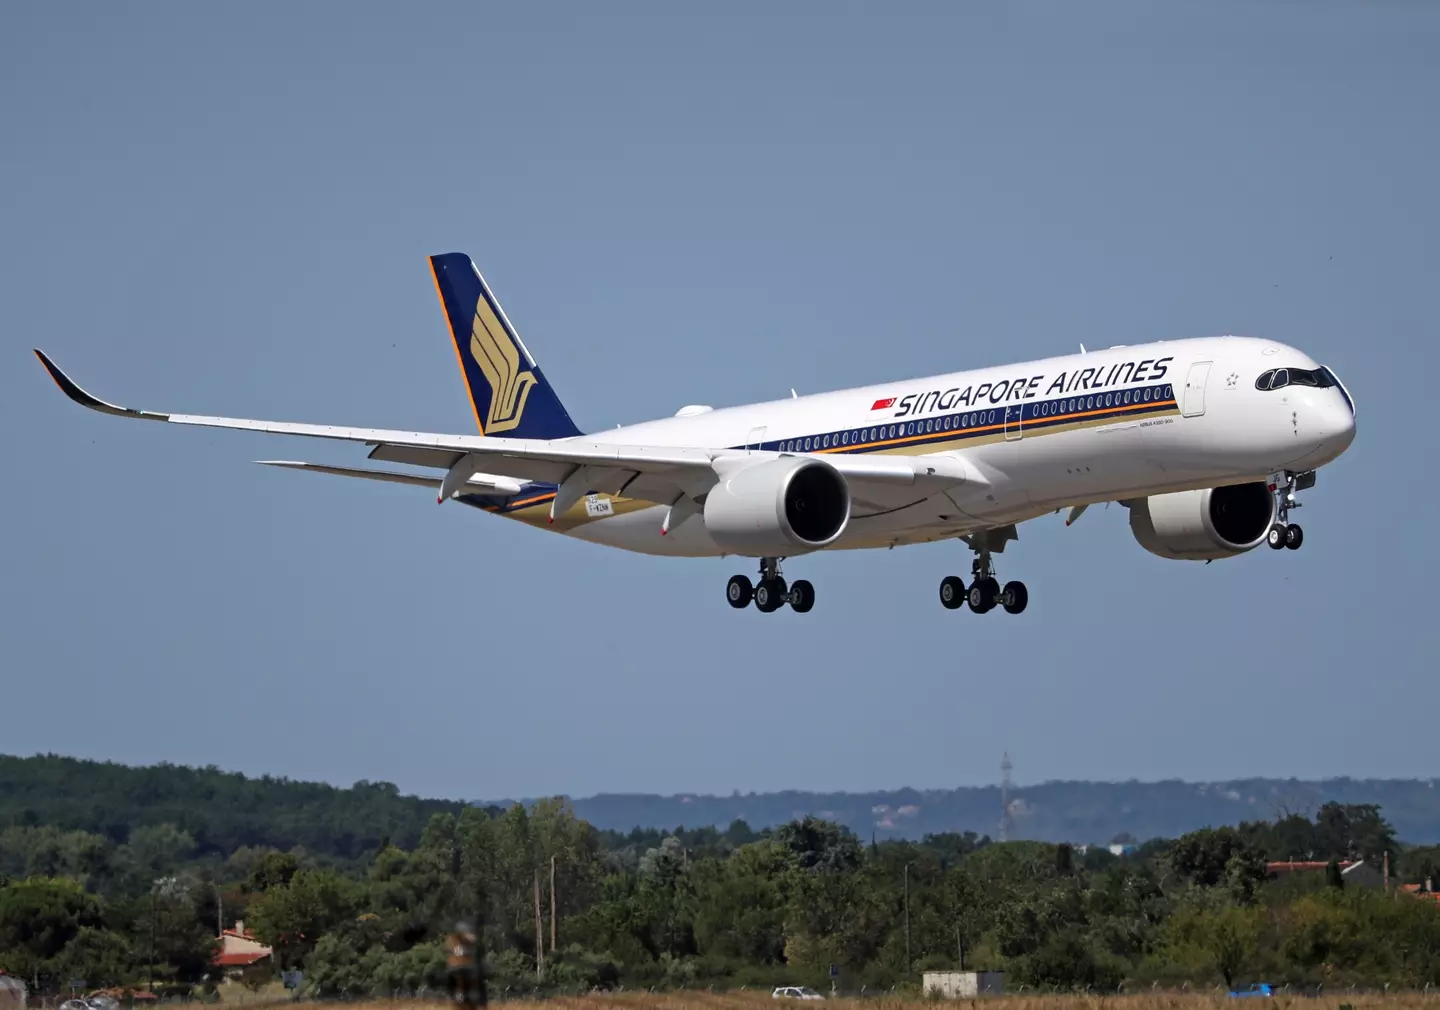 Singapore Airlines have now refunded the couple.